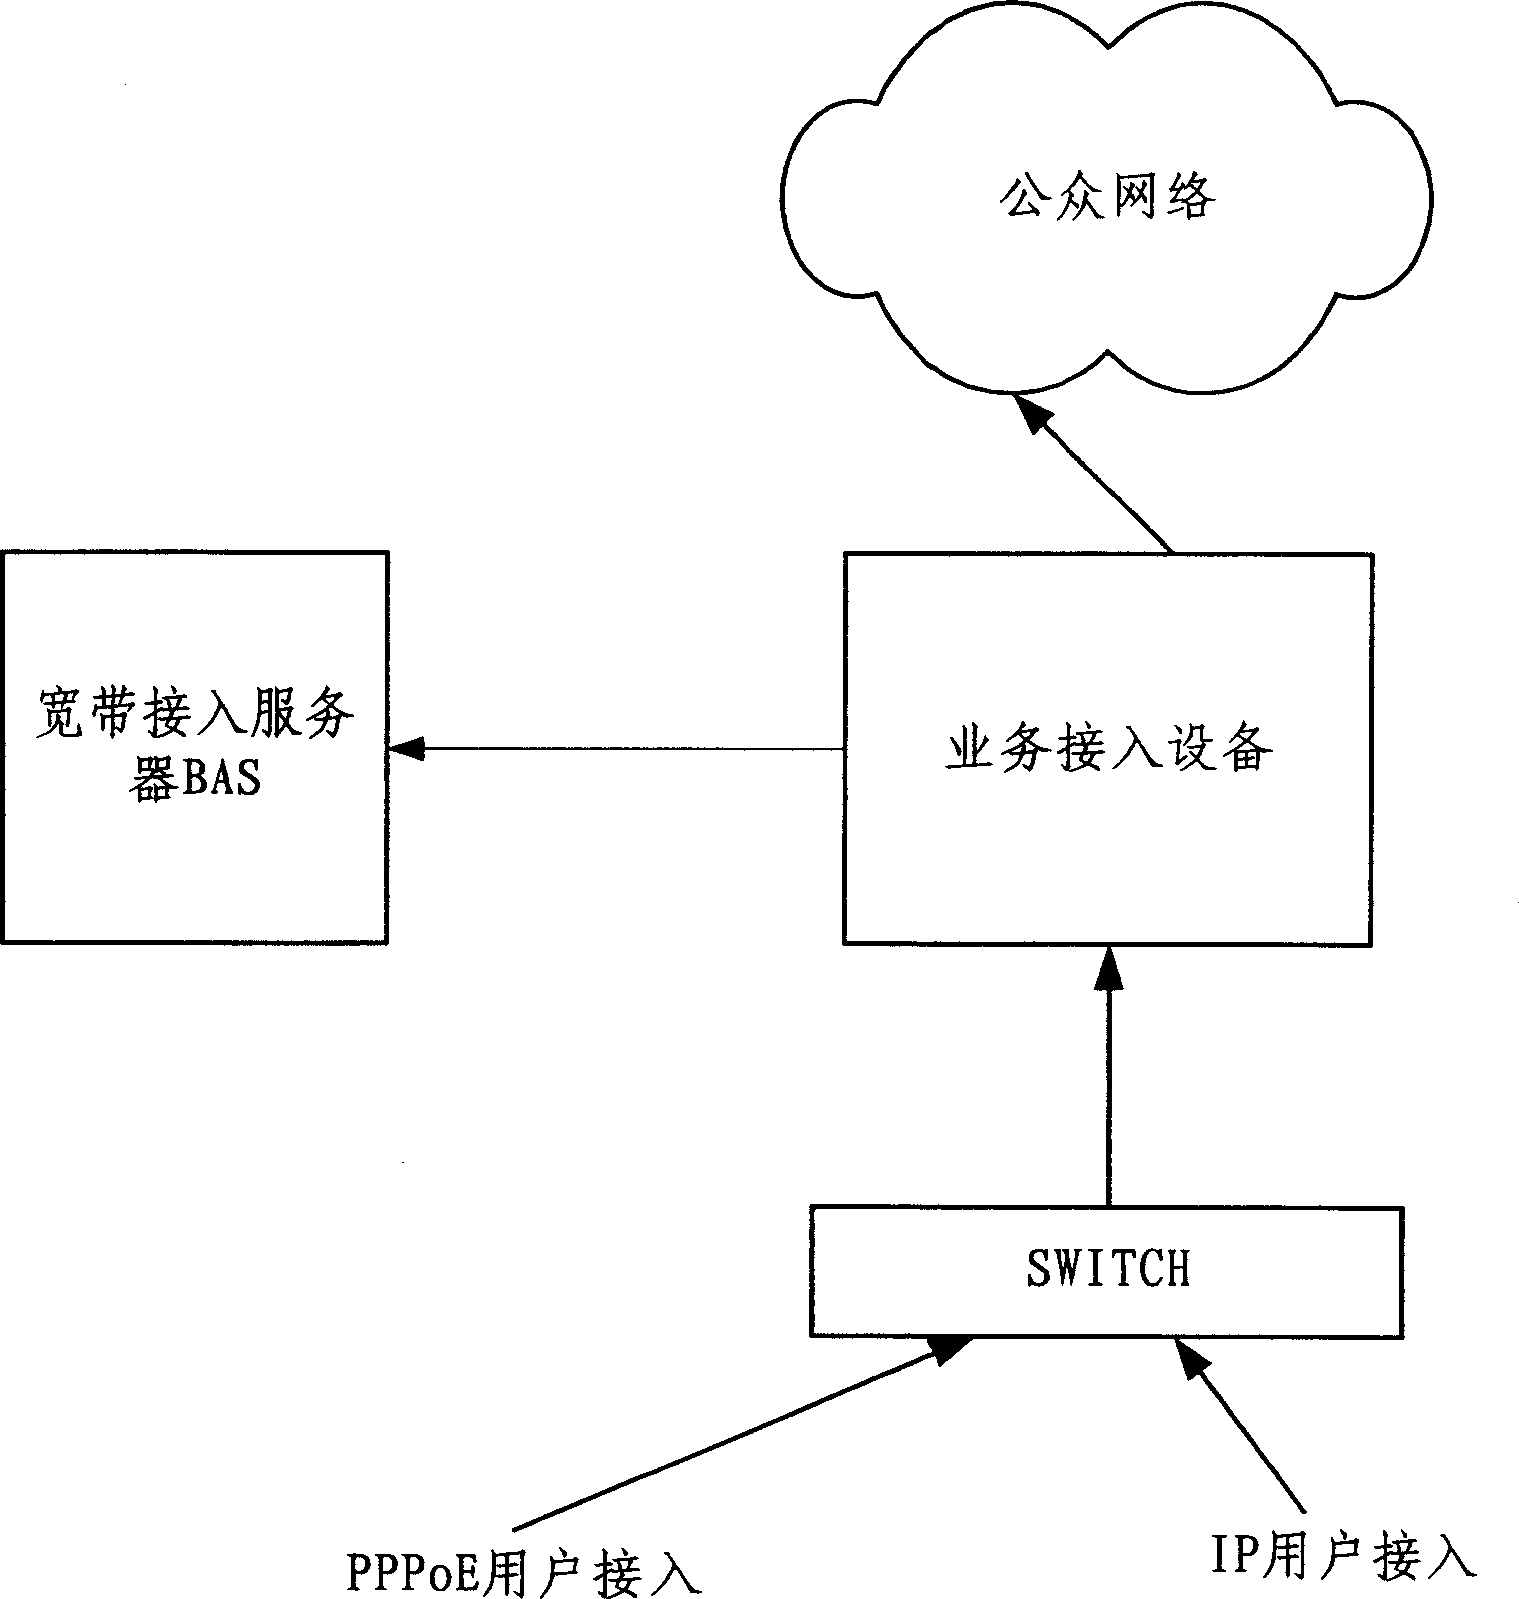 Virtual exchanging method capable of routing